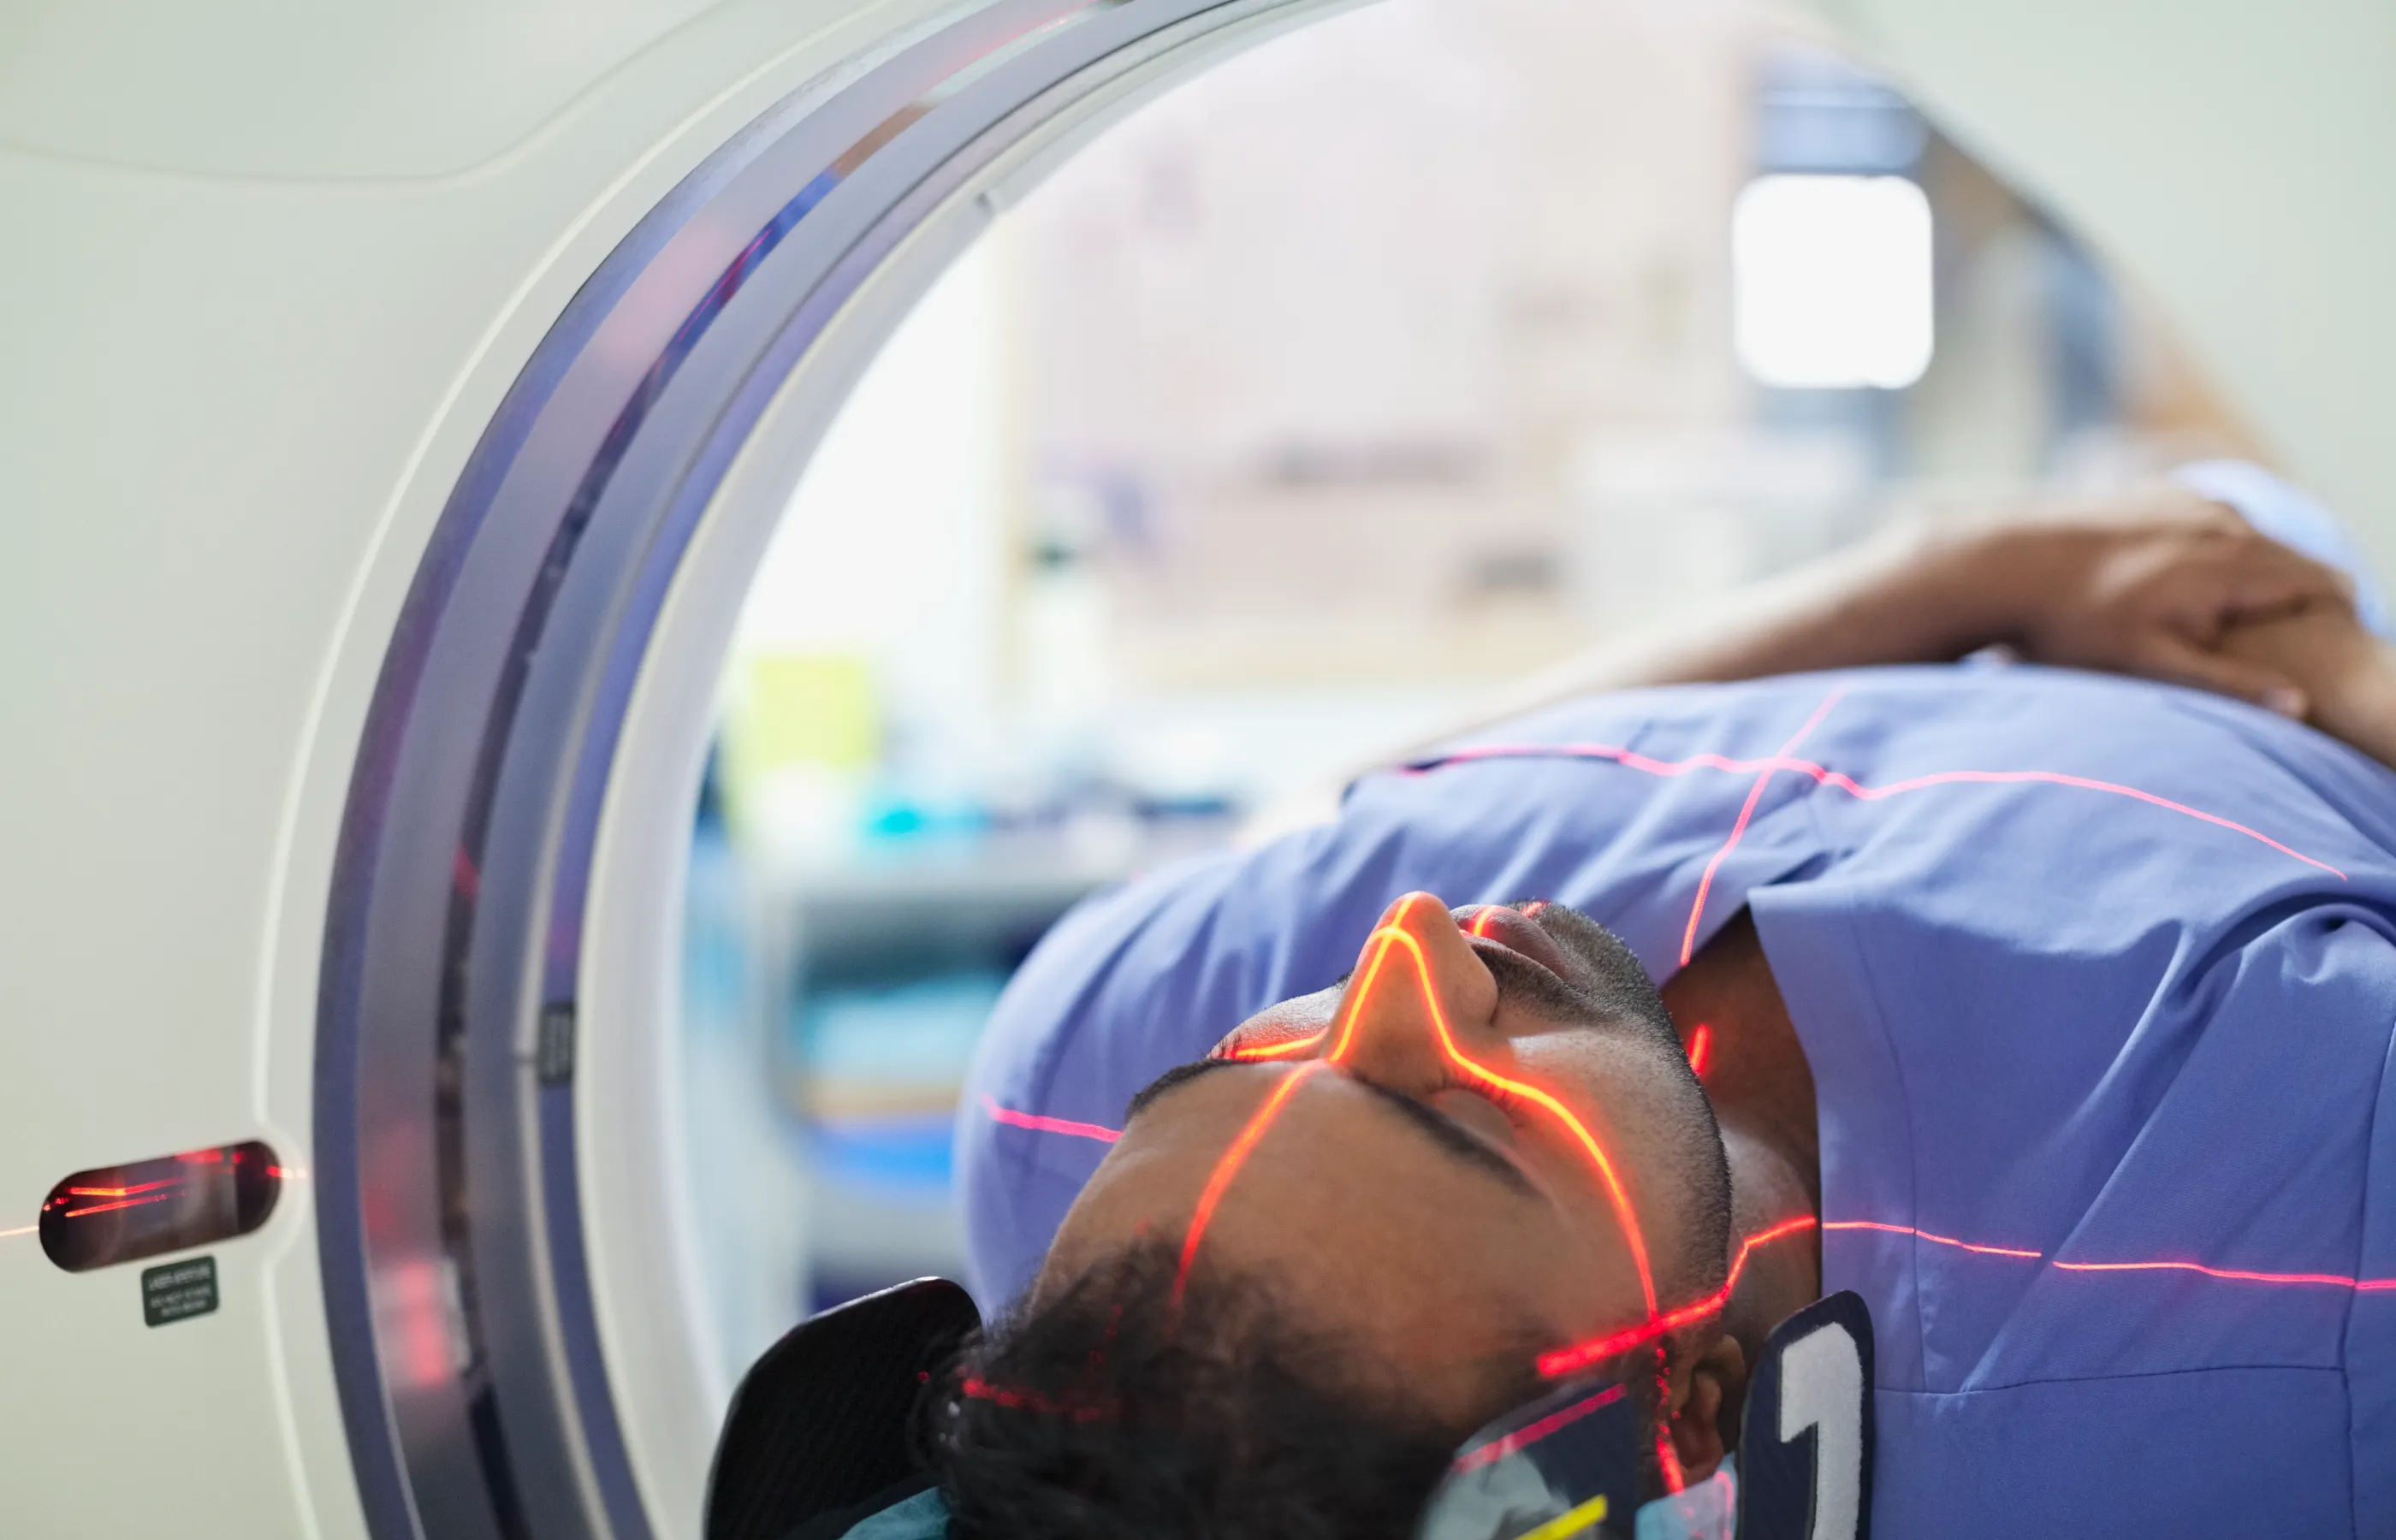 A patient having an MRI scan completed. They are lying down in the machine with their eyes closed as the machine beams light along their face and body. 